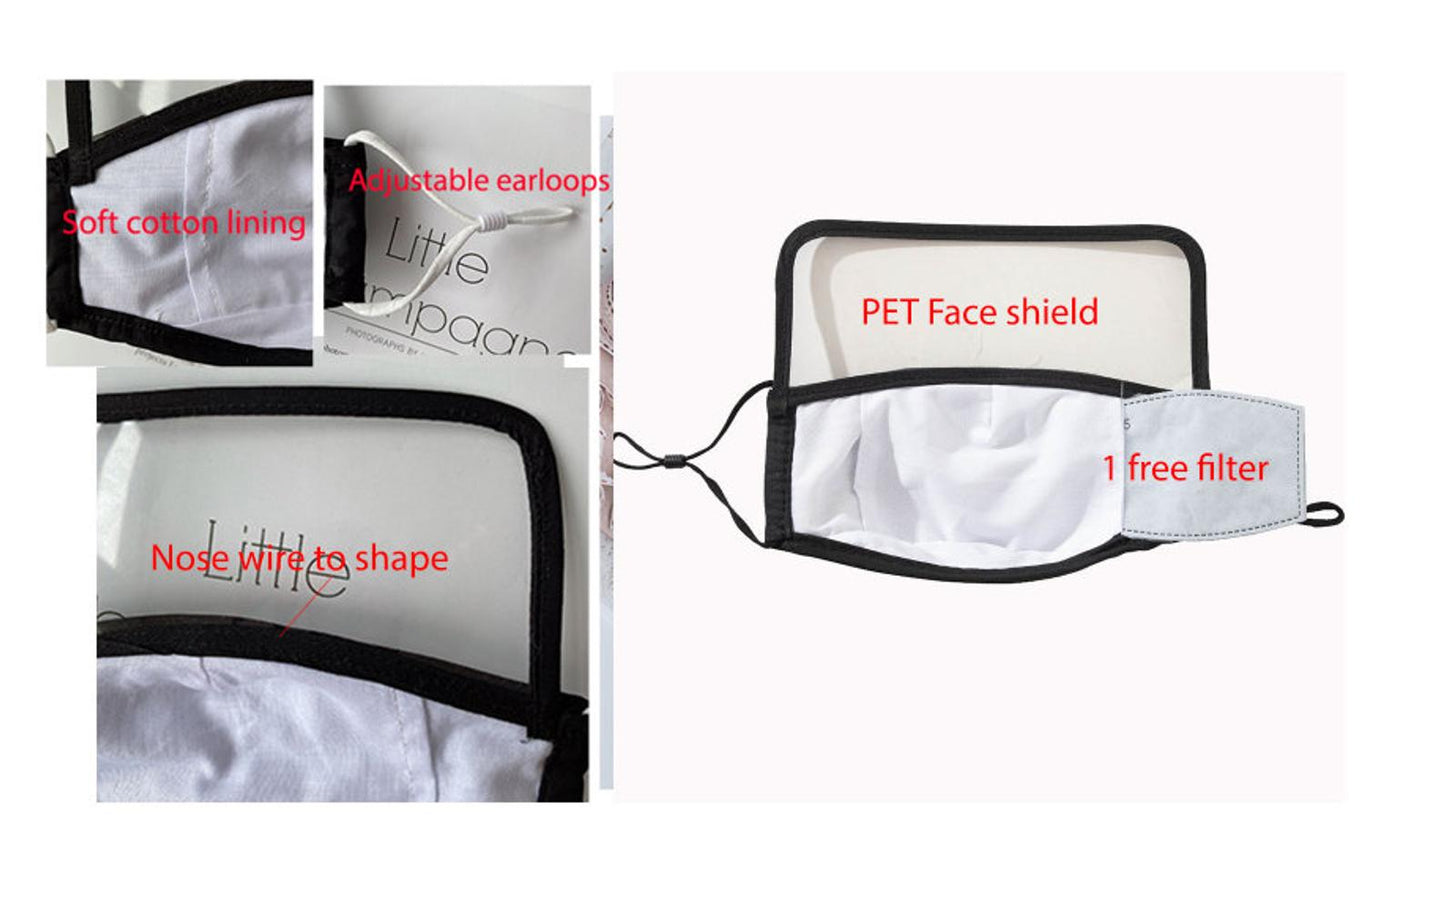 Cotton Face Shield Facemask Cloth face covering Black face mask w/ filter